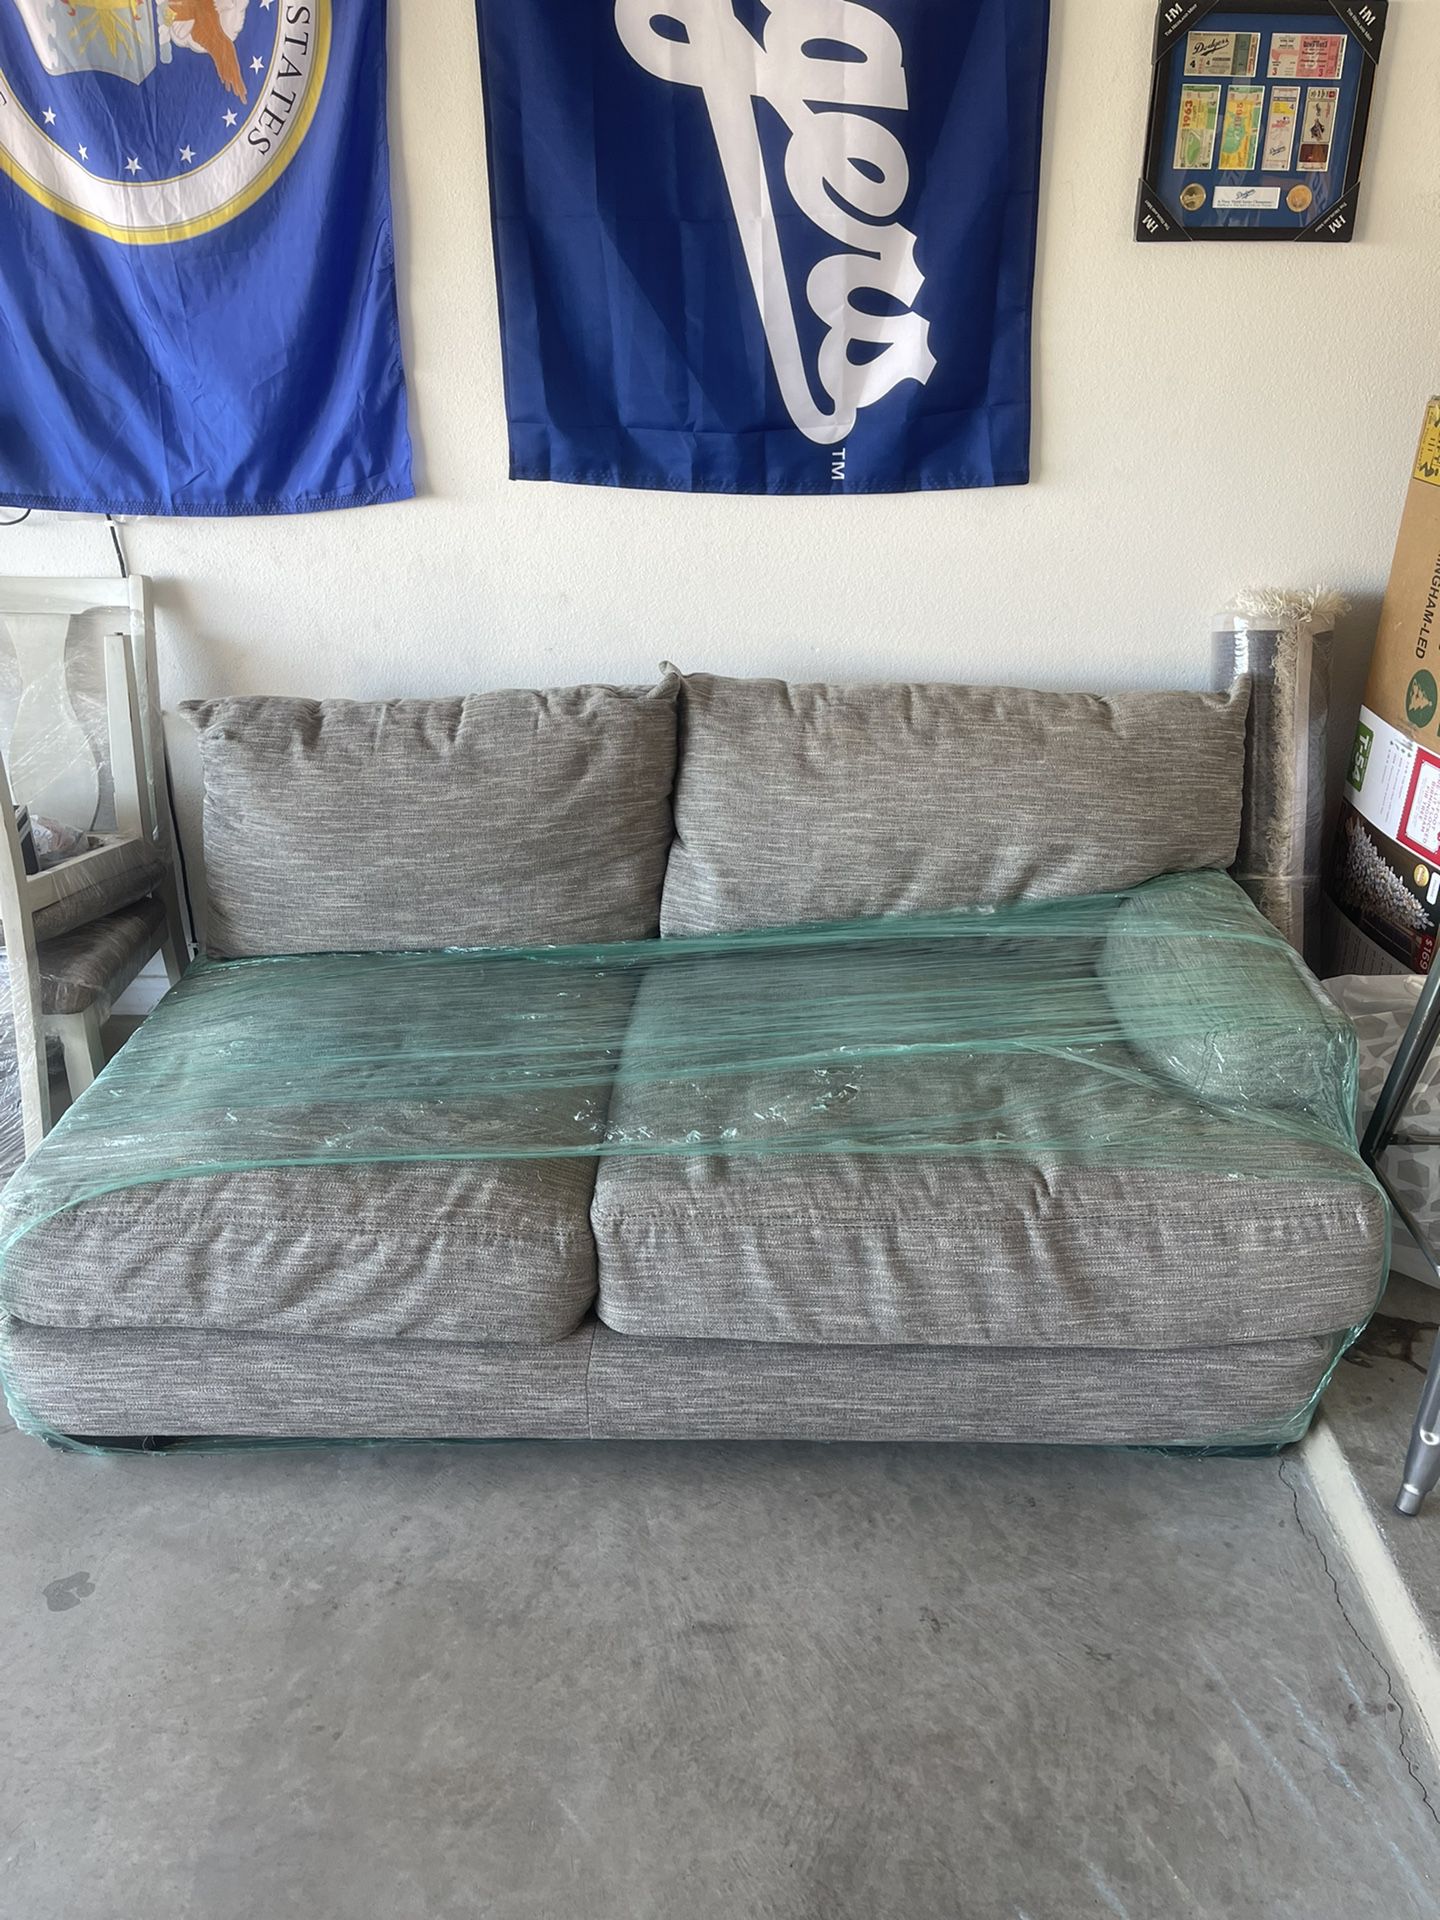 Grey Cloud Couch 